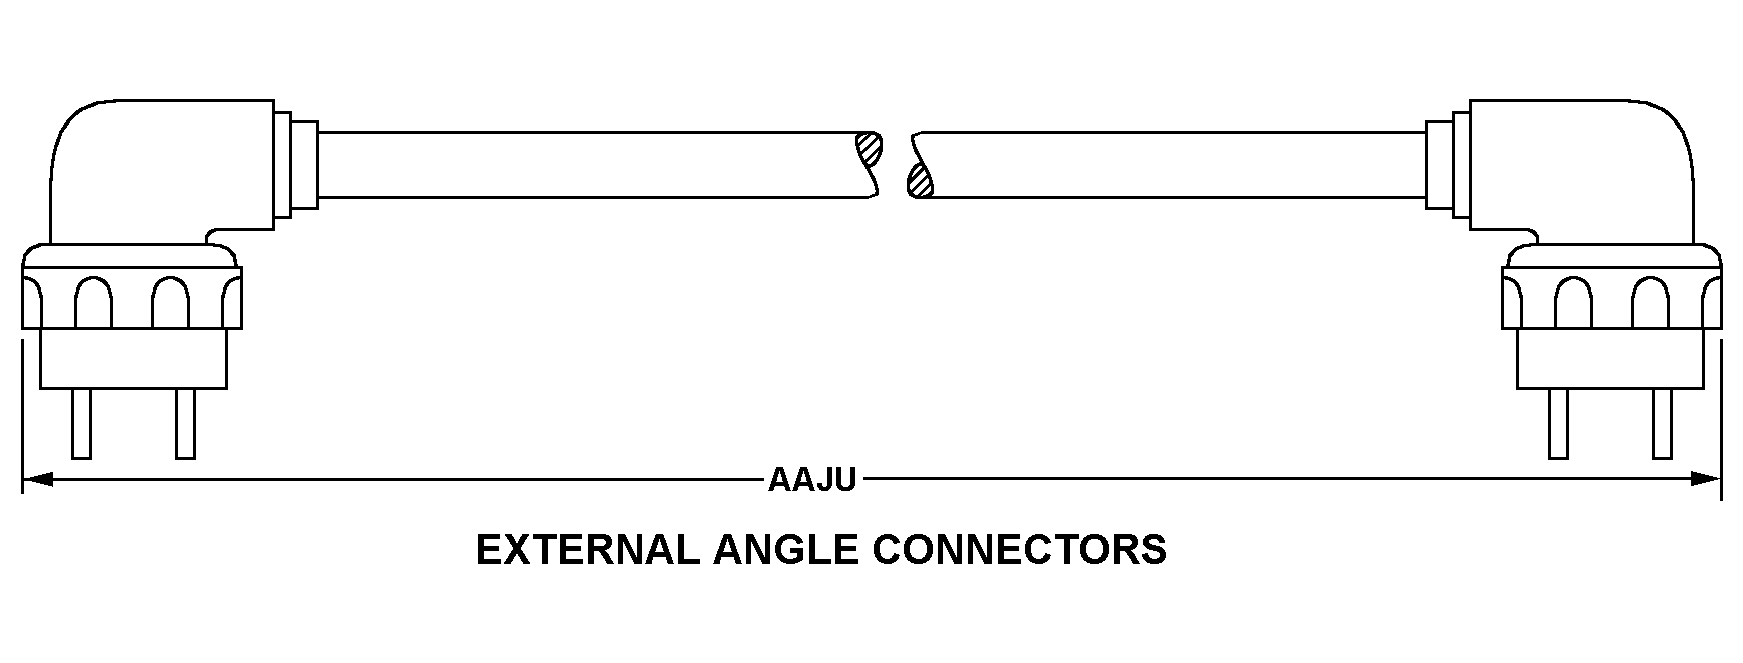 EXTERNAL ANGLE CONNECTORS style nsn 5995-01-165-6654